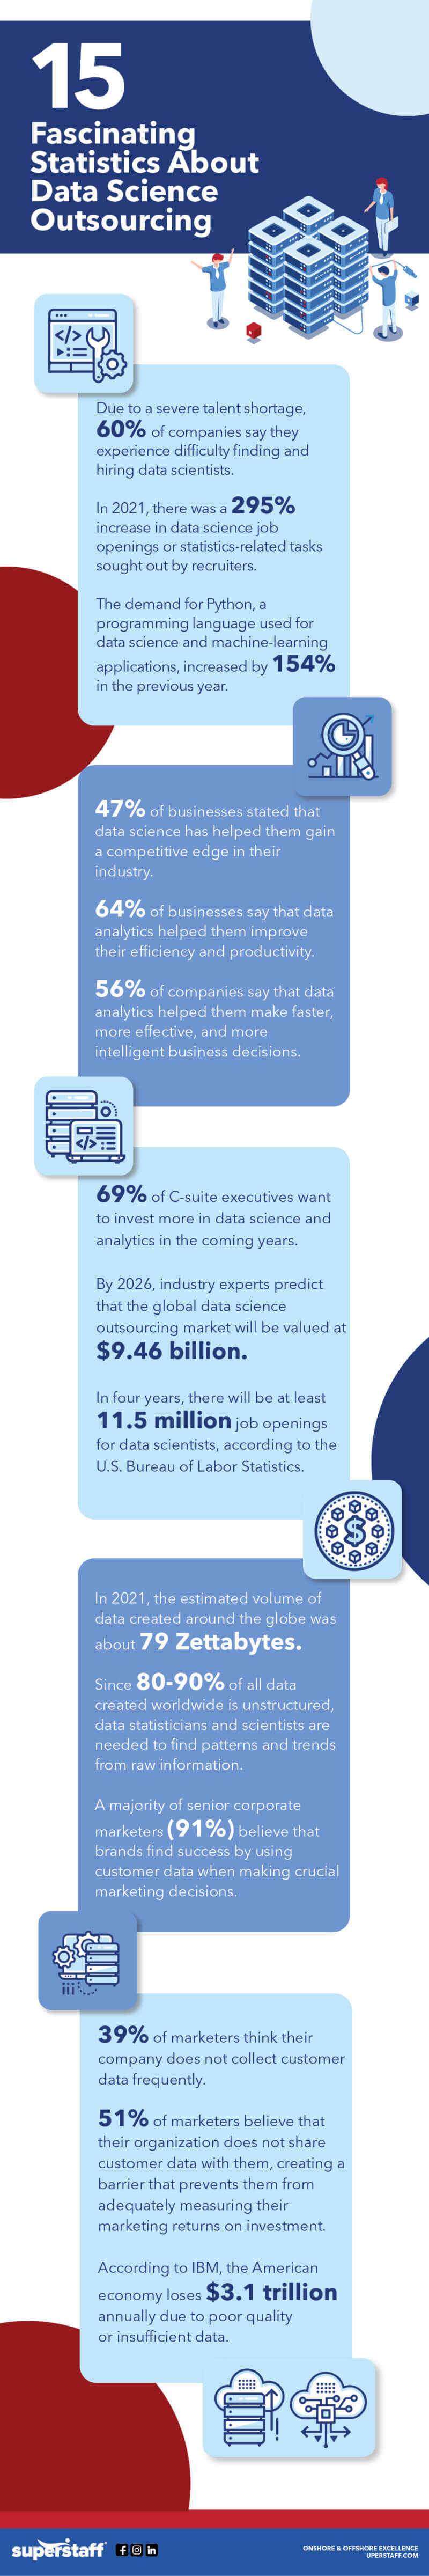 15 Fascinating Statistics About Data Science Outsourcing